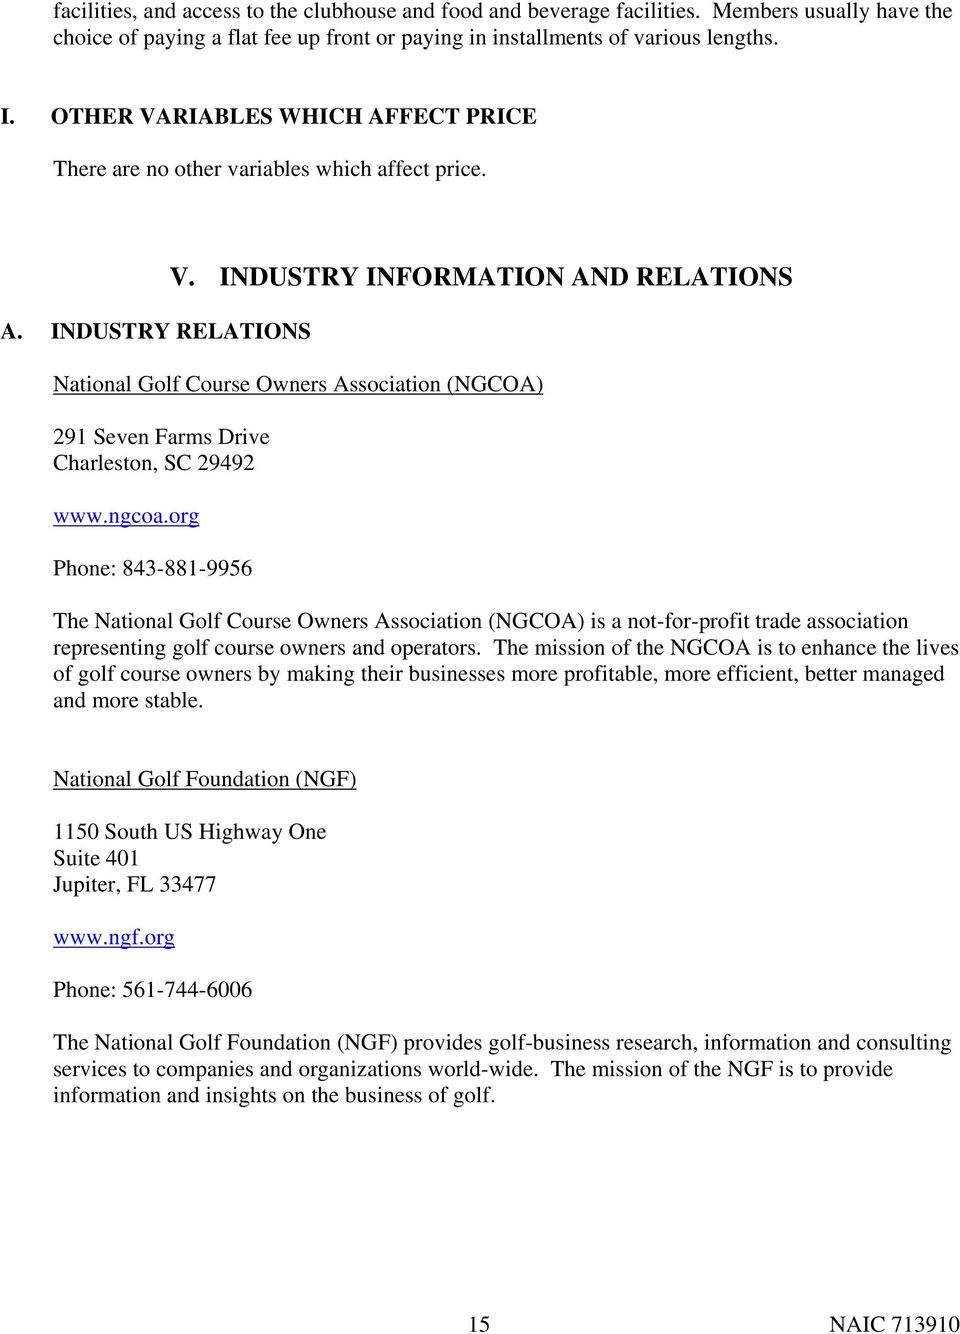 INDUSTRY INFORMATION AND RELATIONS National Golf Course Owners Association (NGCOA) 291 Seven Farms Drive Charleston, SC 29492 www.ngcoa.